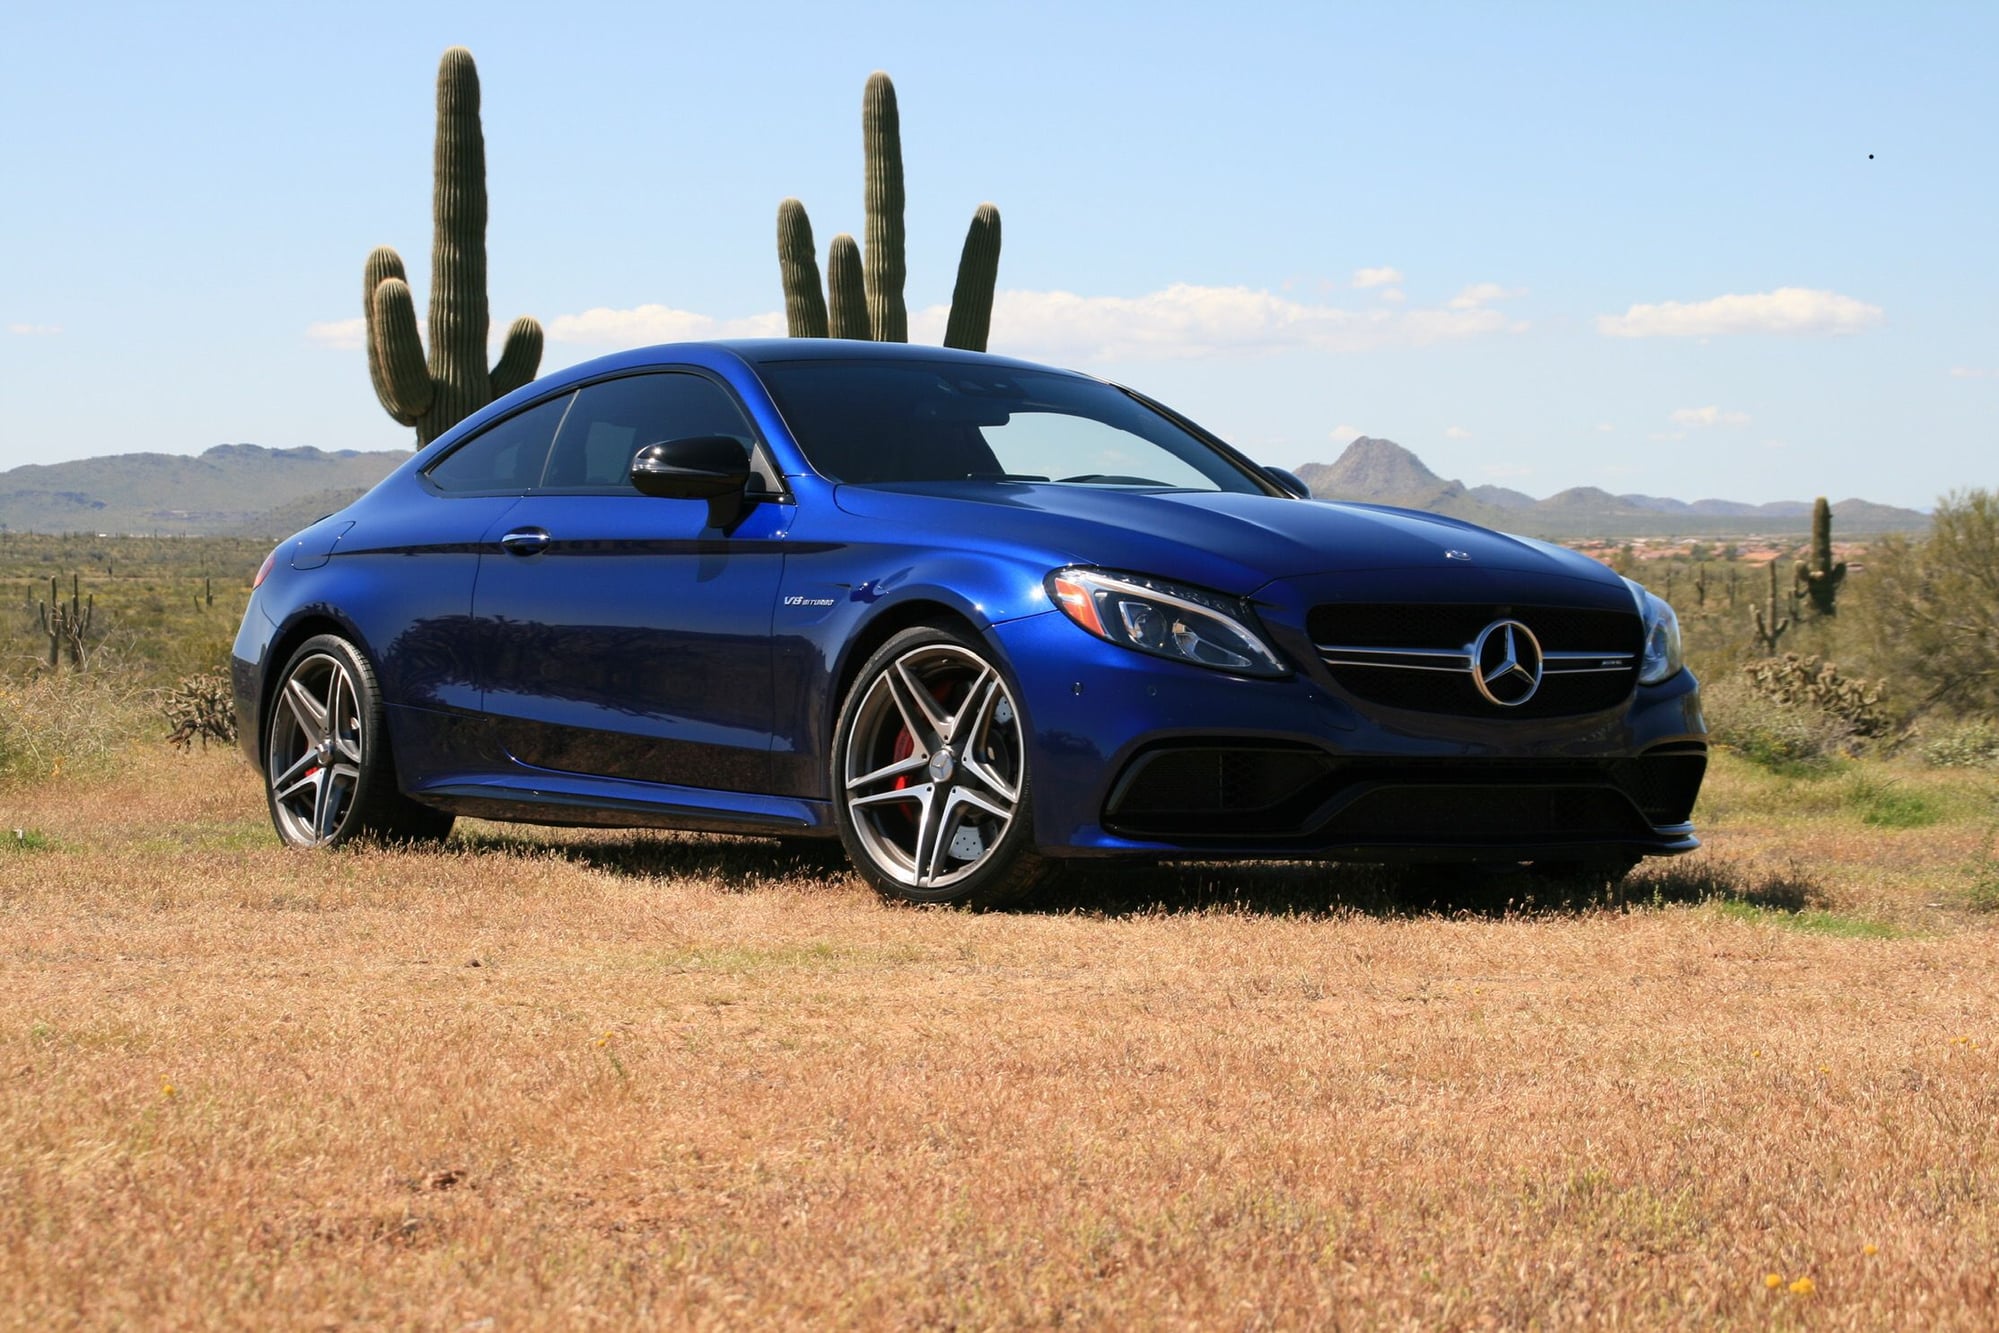 Wheels and Tires/Axles - Mercedes AMG 19 Inch Wheels - Used - 2017 to 2021 Mercedes-Benz C63 AMG S - Phoenix, AZ 85085, United States